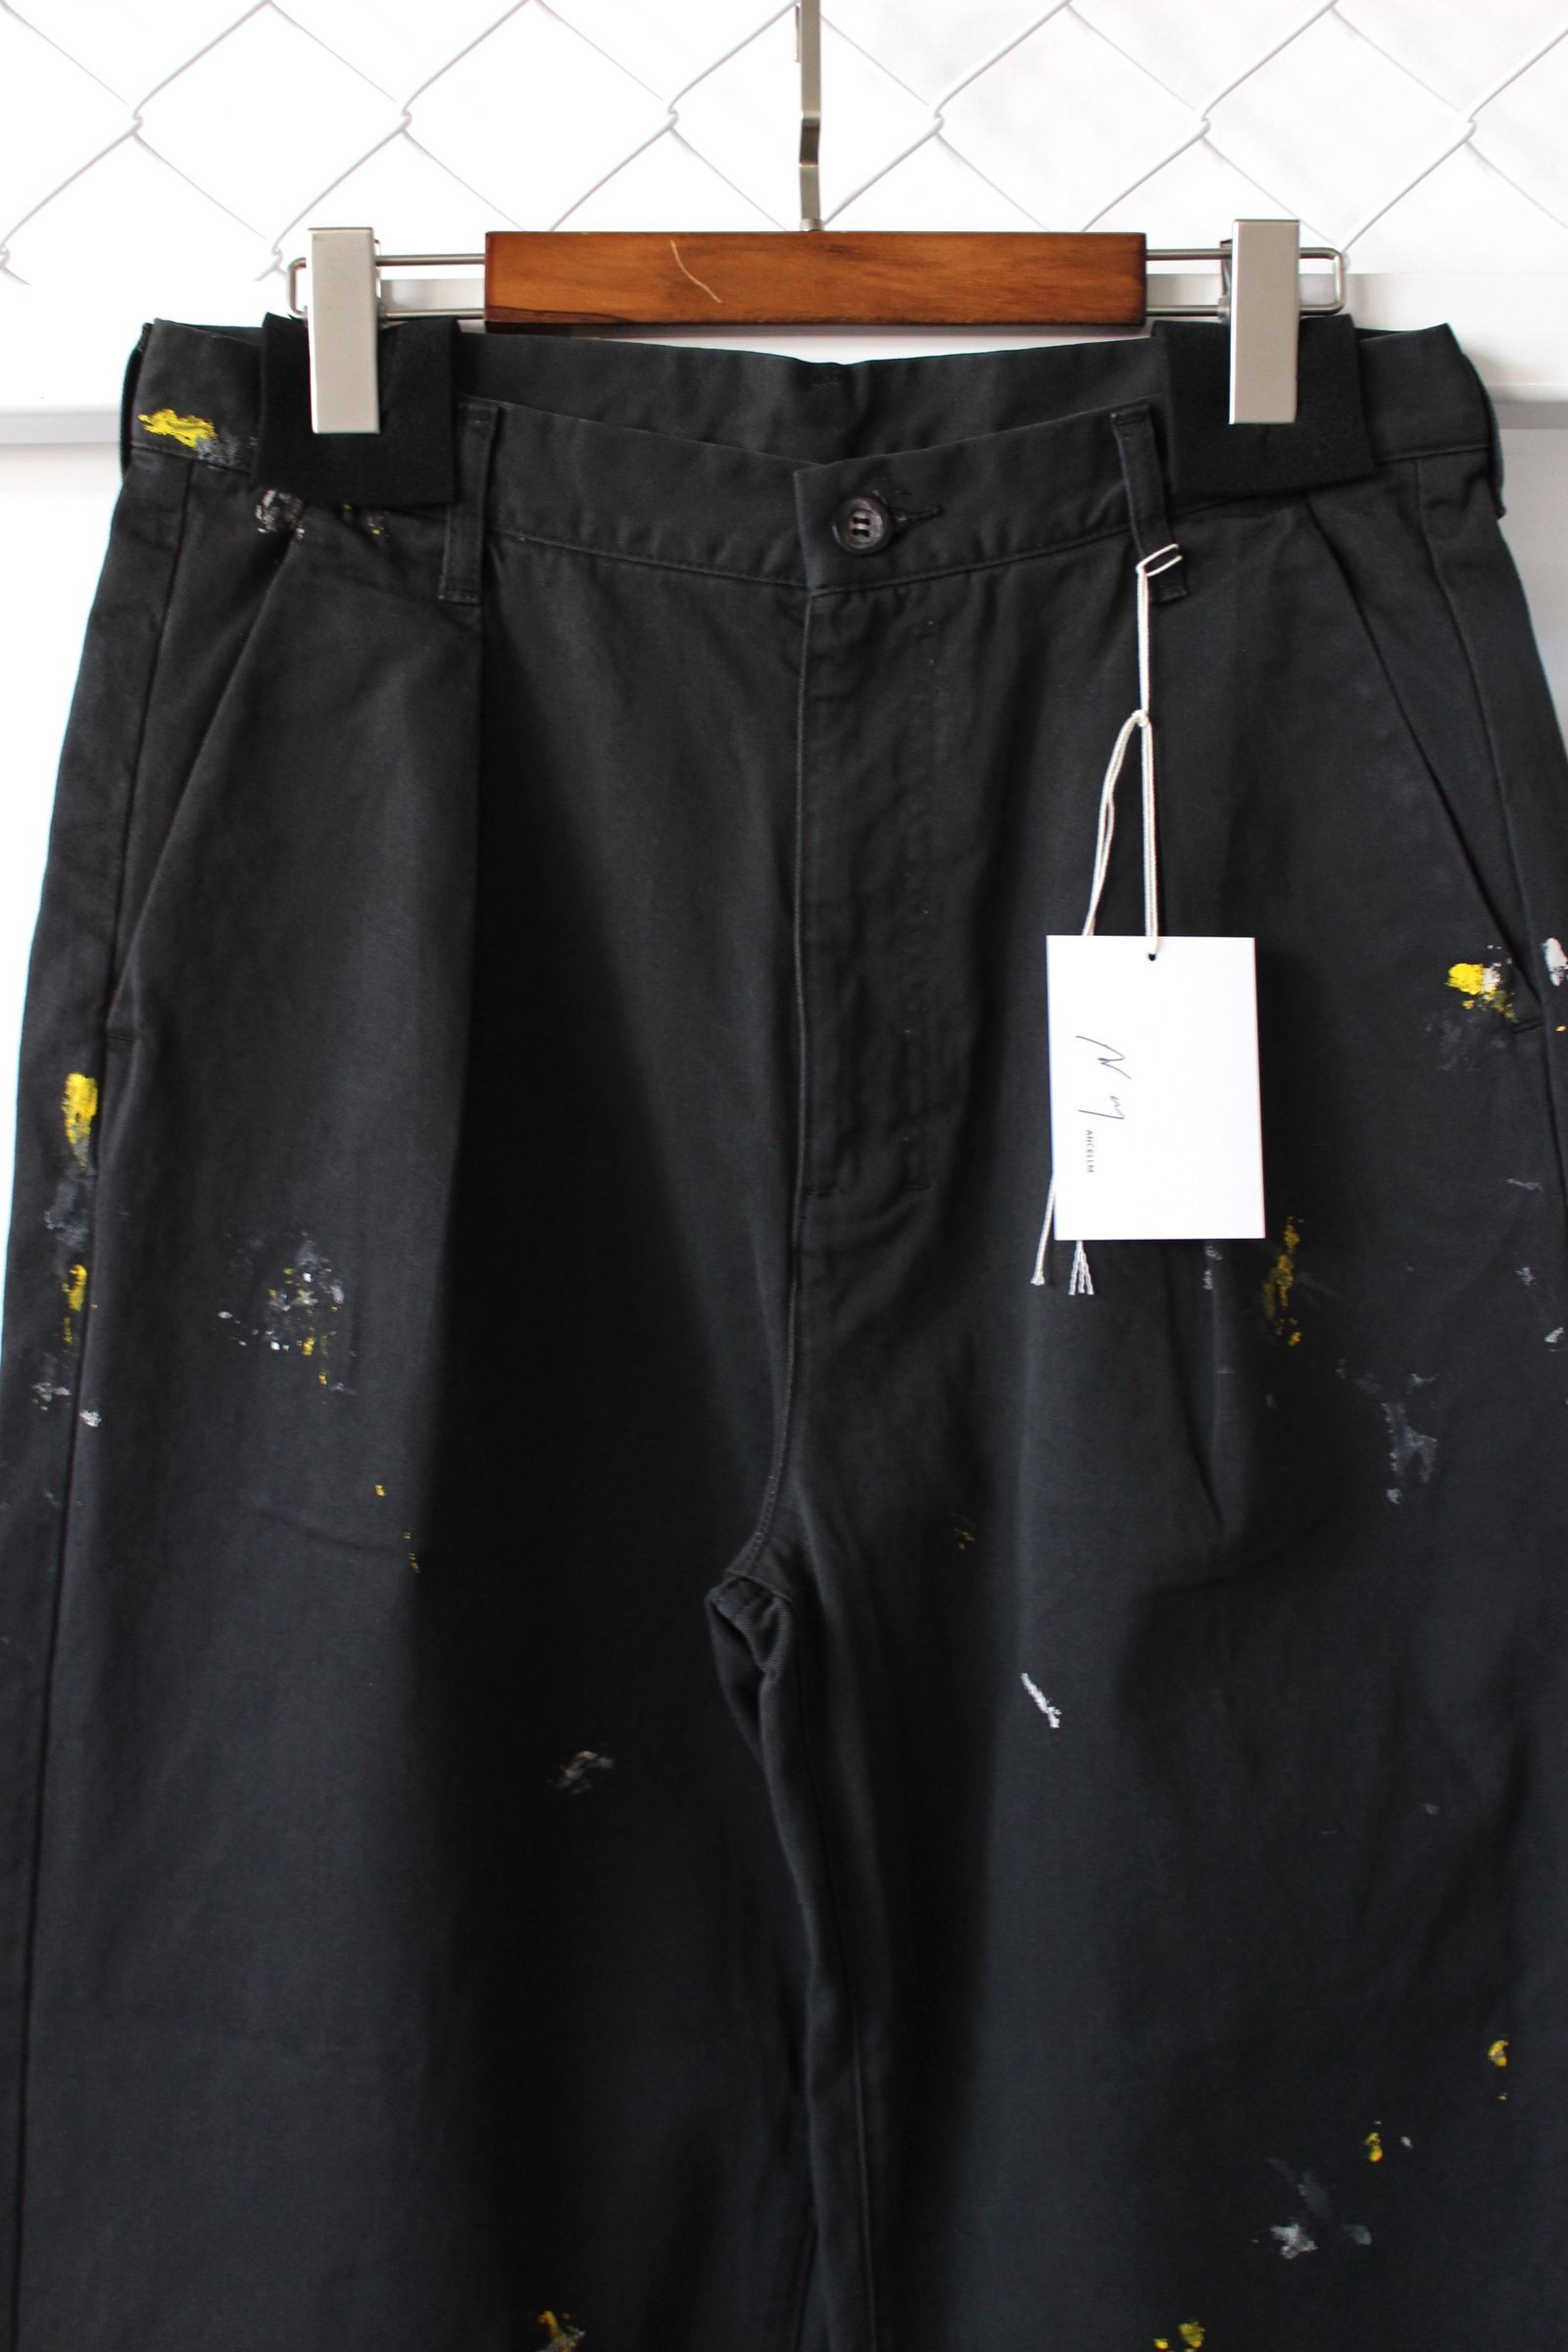 ANCELLM PAINT CHINO TROUSERS ブラック 1 新品